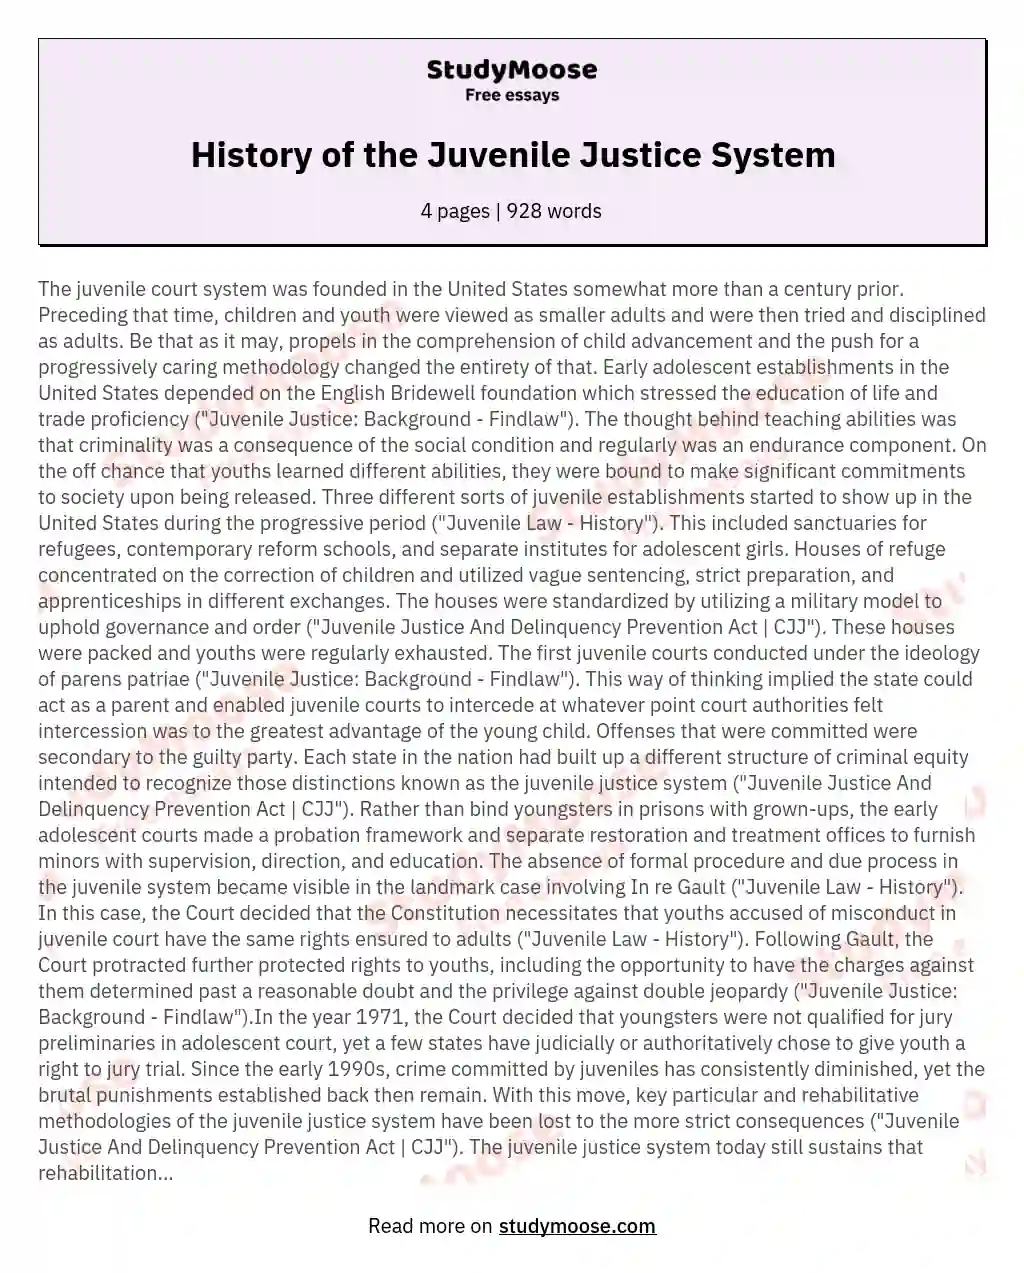 History of the Juvenile Justice System